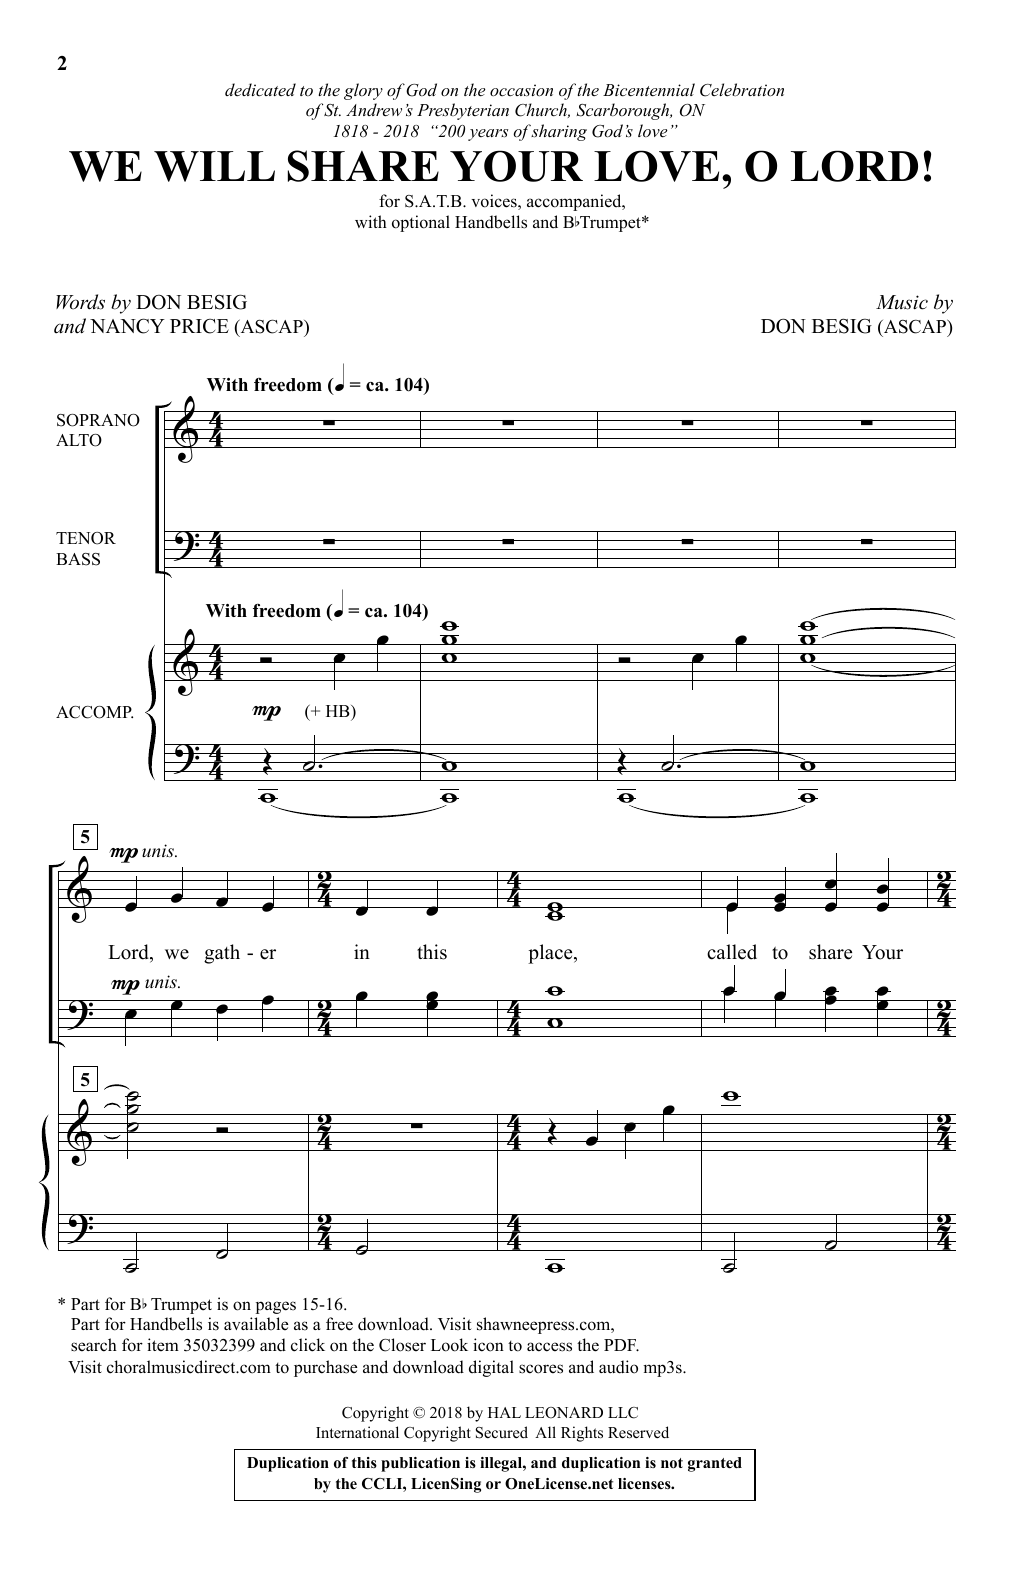 Download Don Besig We Will Share Your Love, O Lord! Sheet Music